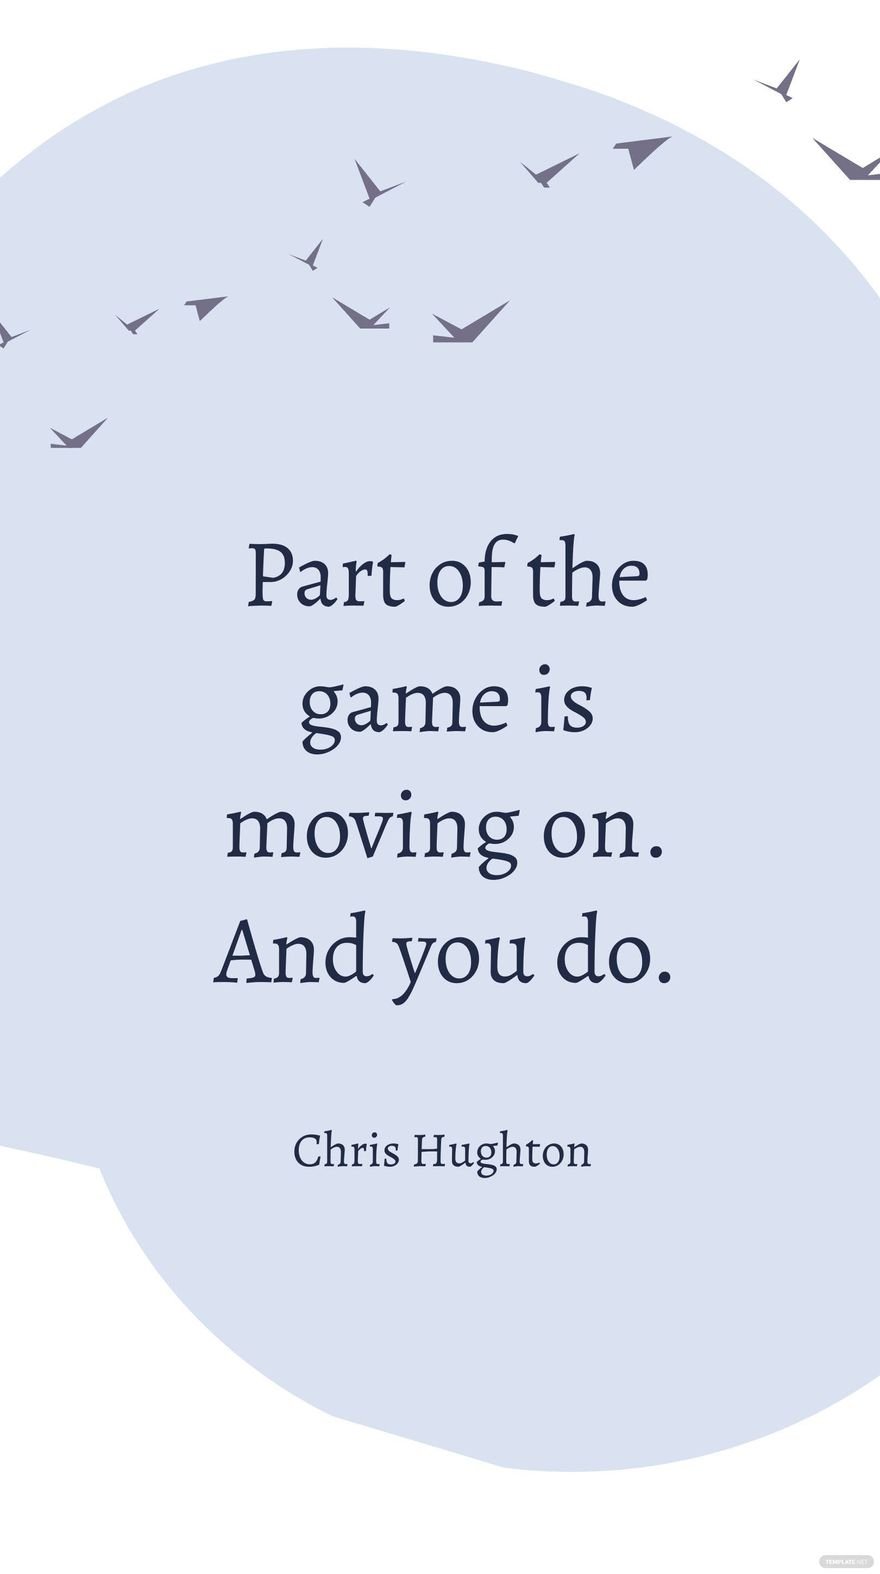 Chris Hughton - Part of the game is moving on. And you do.